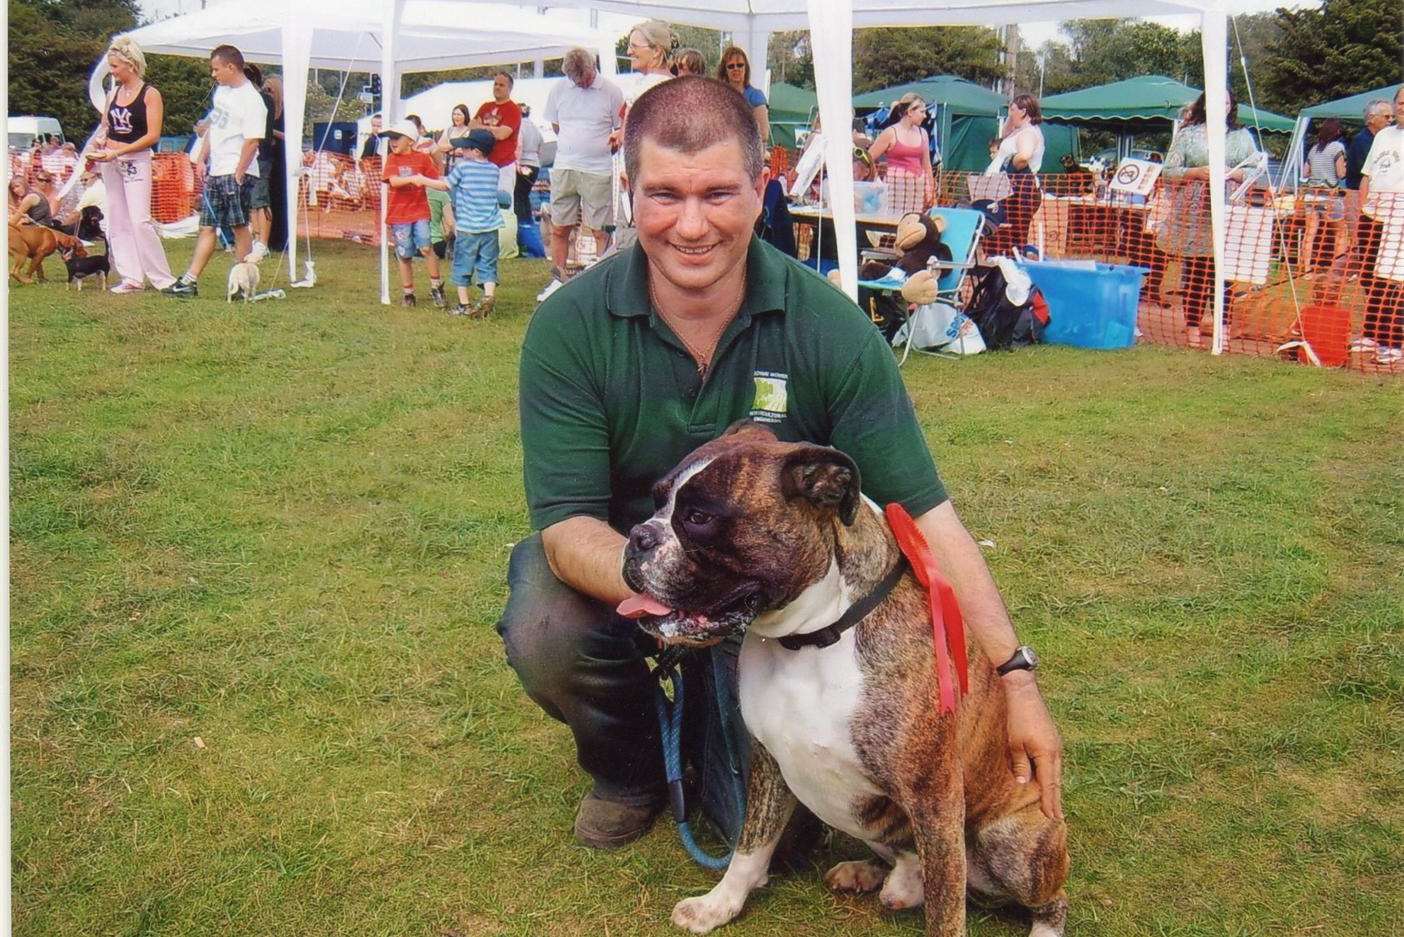 Tye with his owner at an earlier show